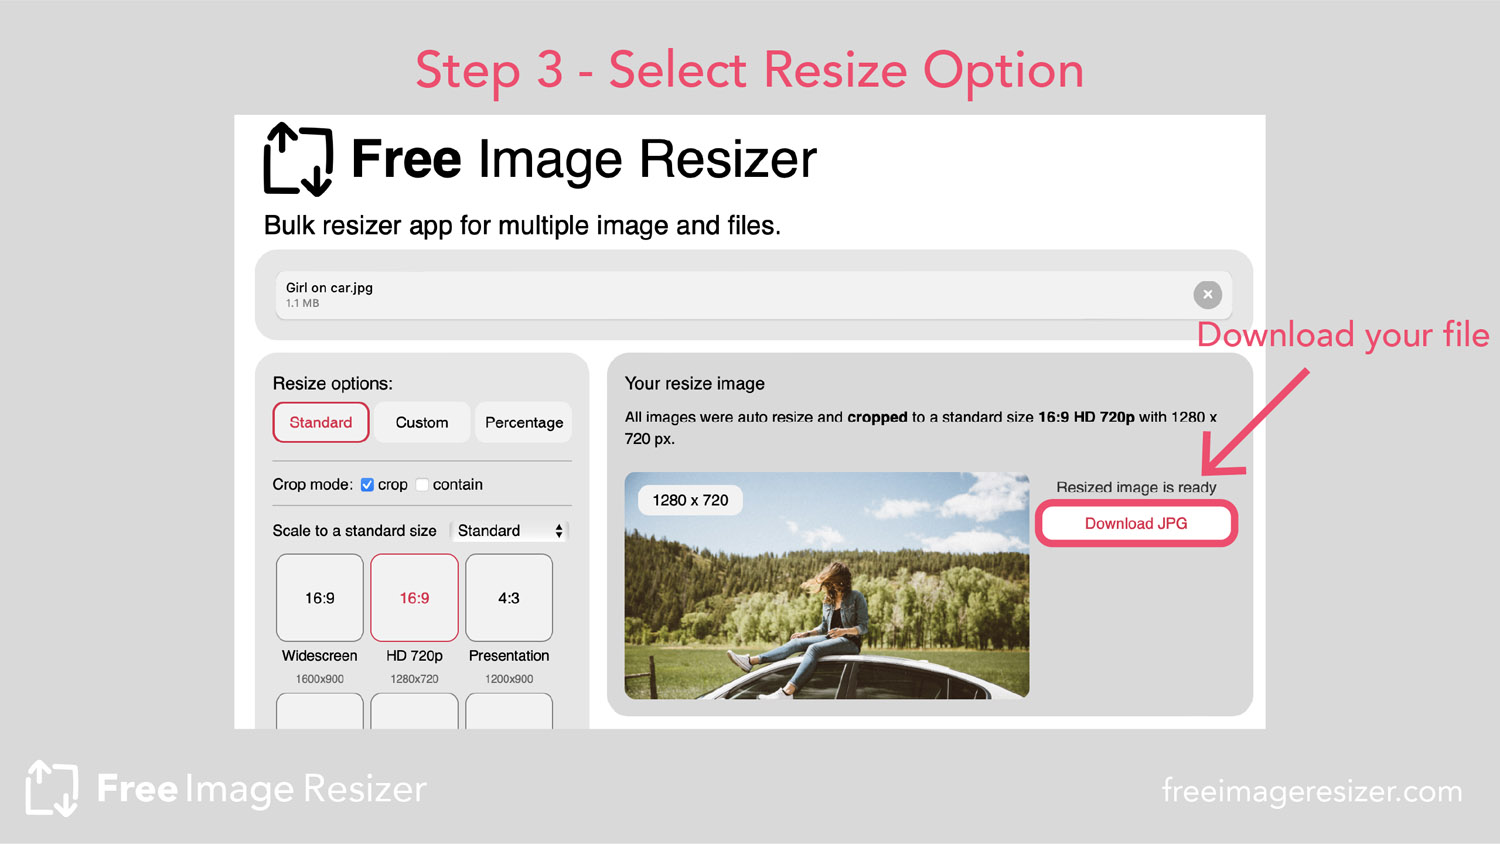 Download your resized images on 720p or 1920x720 for free